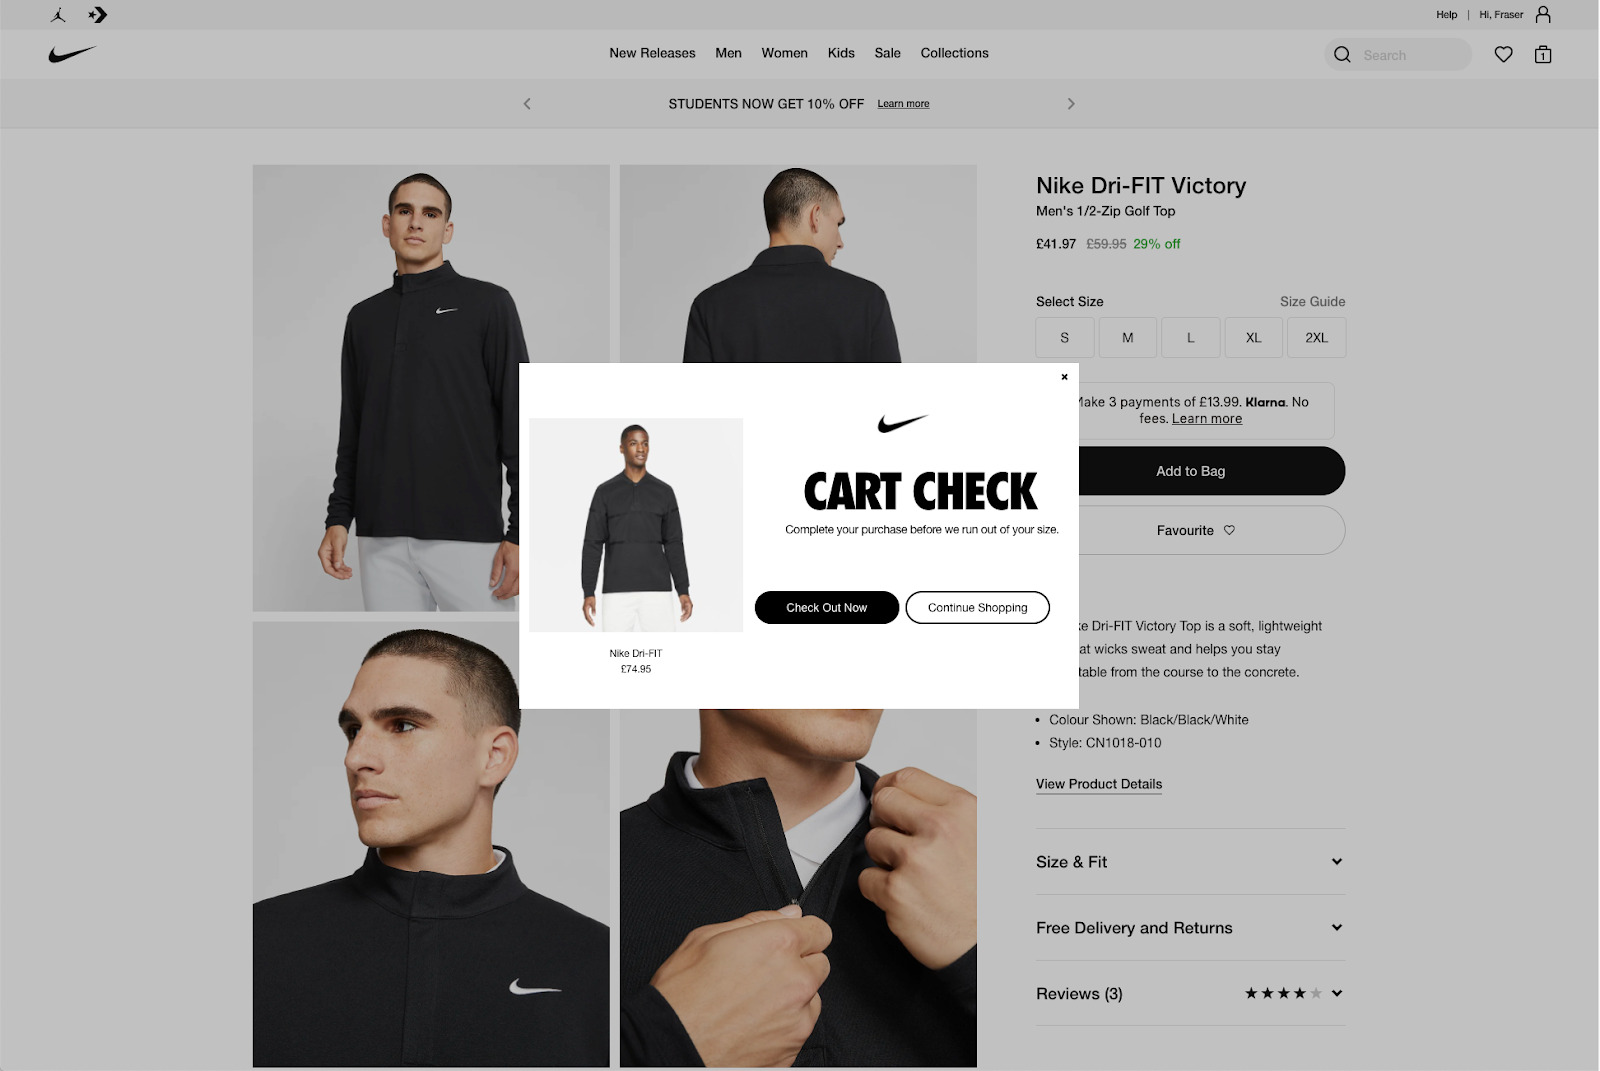 Nike's pop-up message when item is added to cart